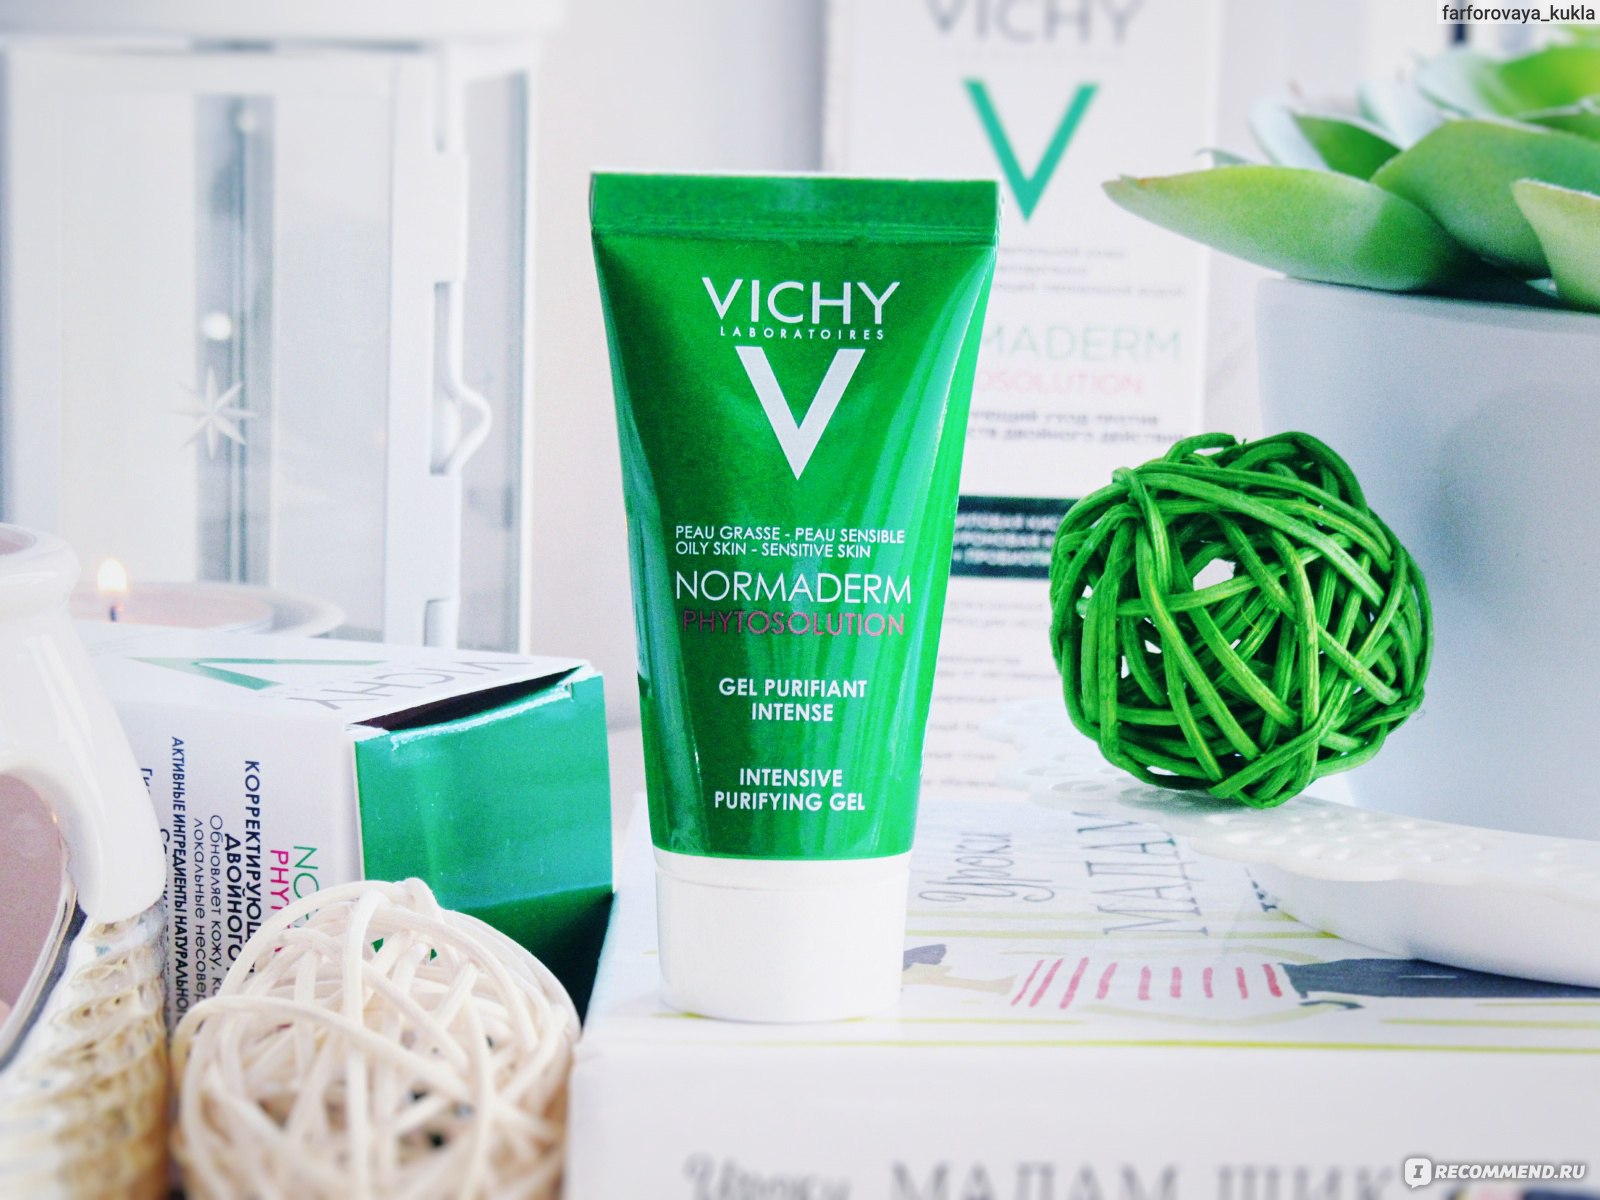 Vichy normaderm intensive purifying gel. Виши умывалка Normaderm. Vichy Нормадерм гель. Vichy Normaderm phytosolution. Vichy Normaderm phytosolution Gel.